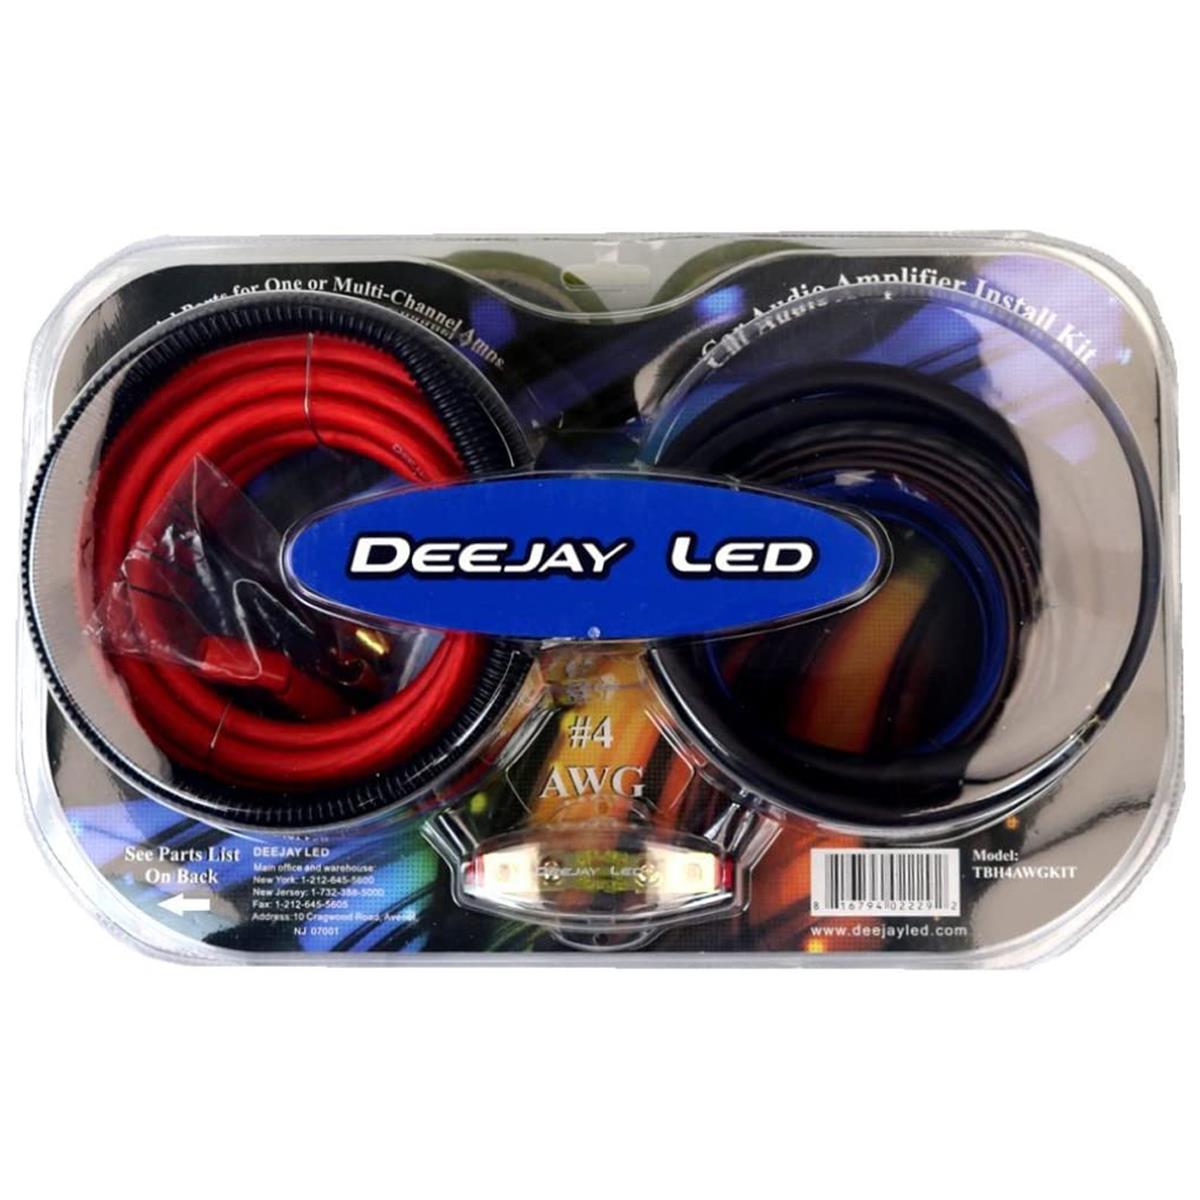 Image of Deejay LED Auto Amplifier Installation Kit with #4-AWG Cables for Car or Truck